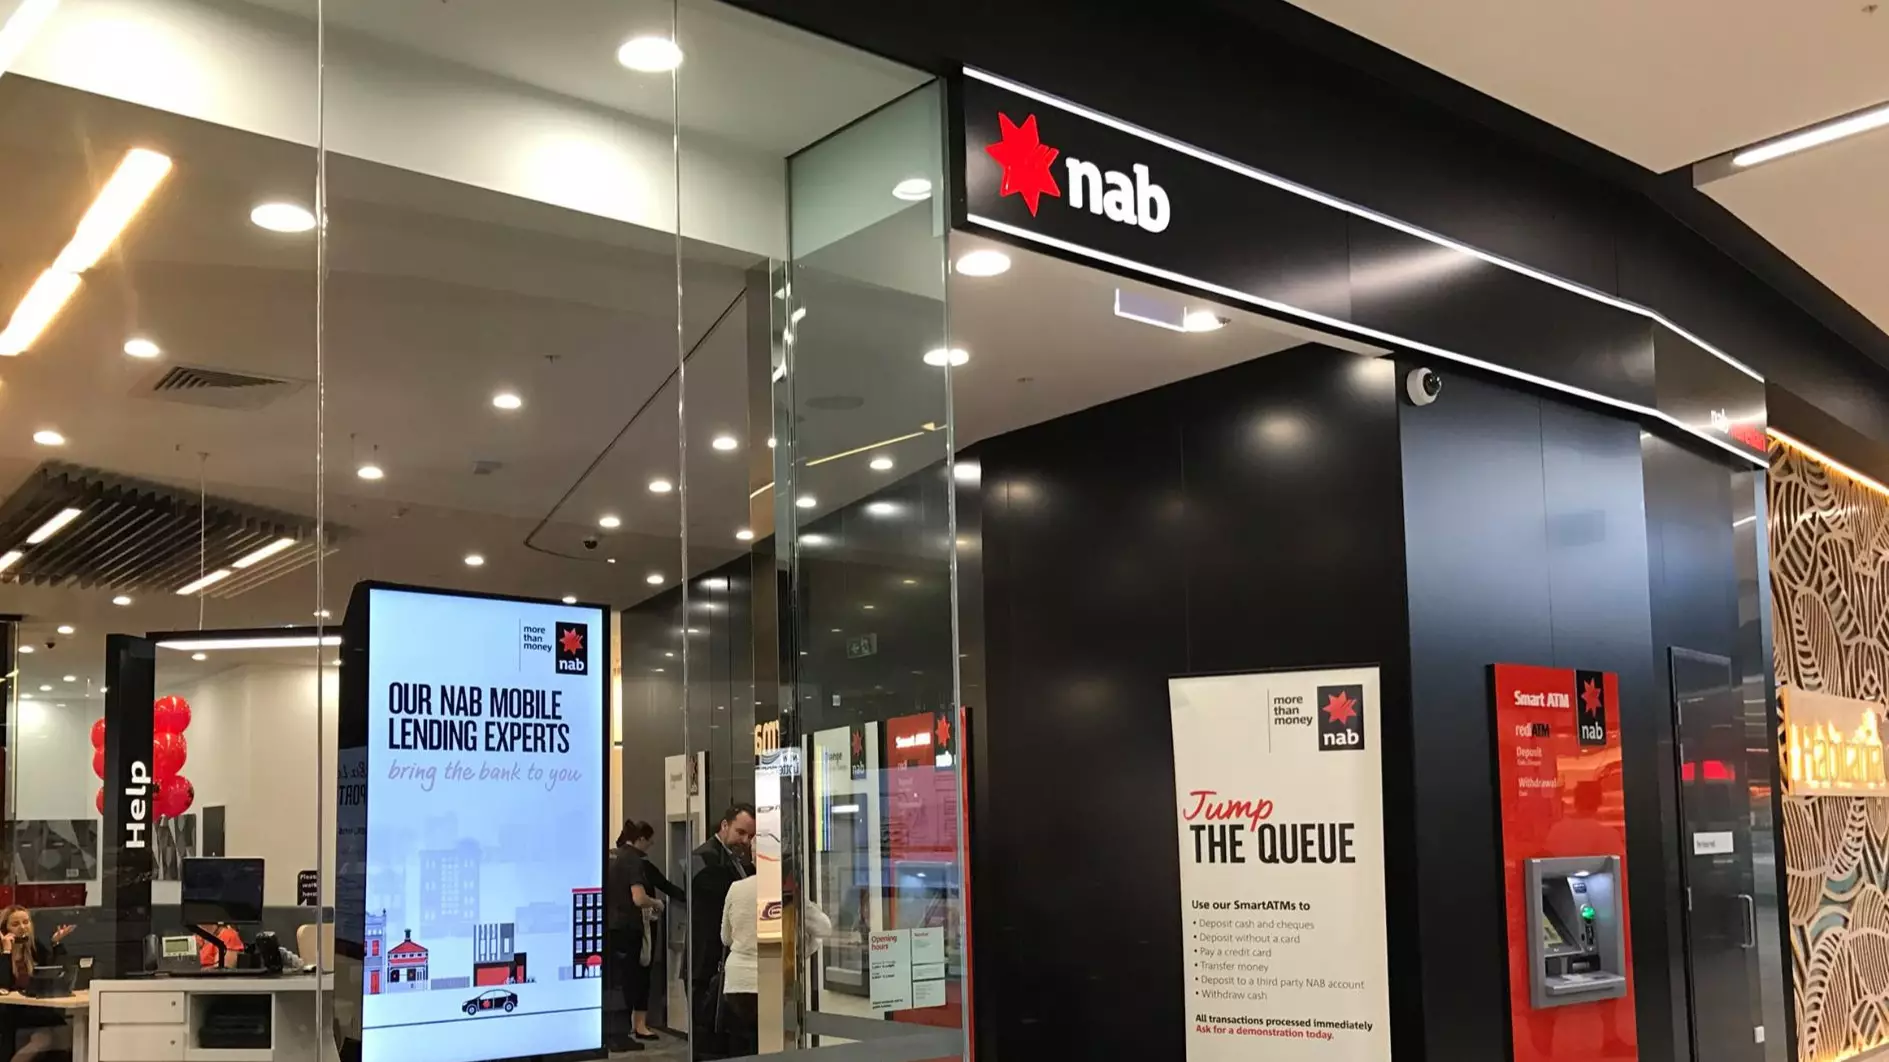 All NAB Branches In Australia Have Closed Due To 'Physical Security Threat'